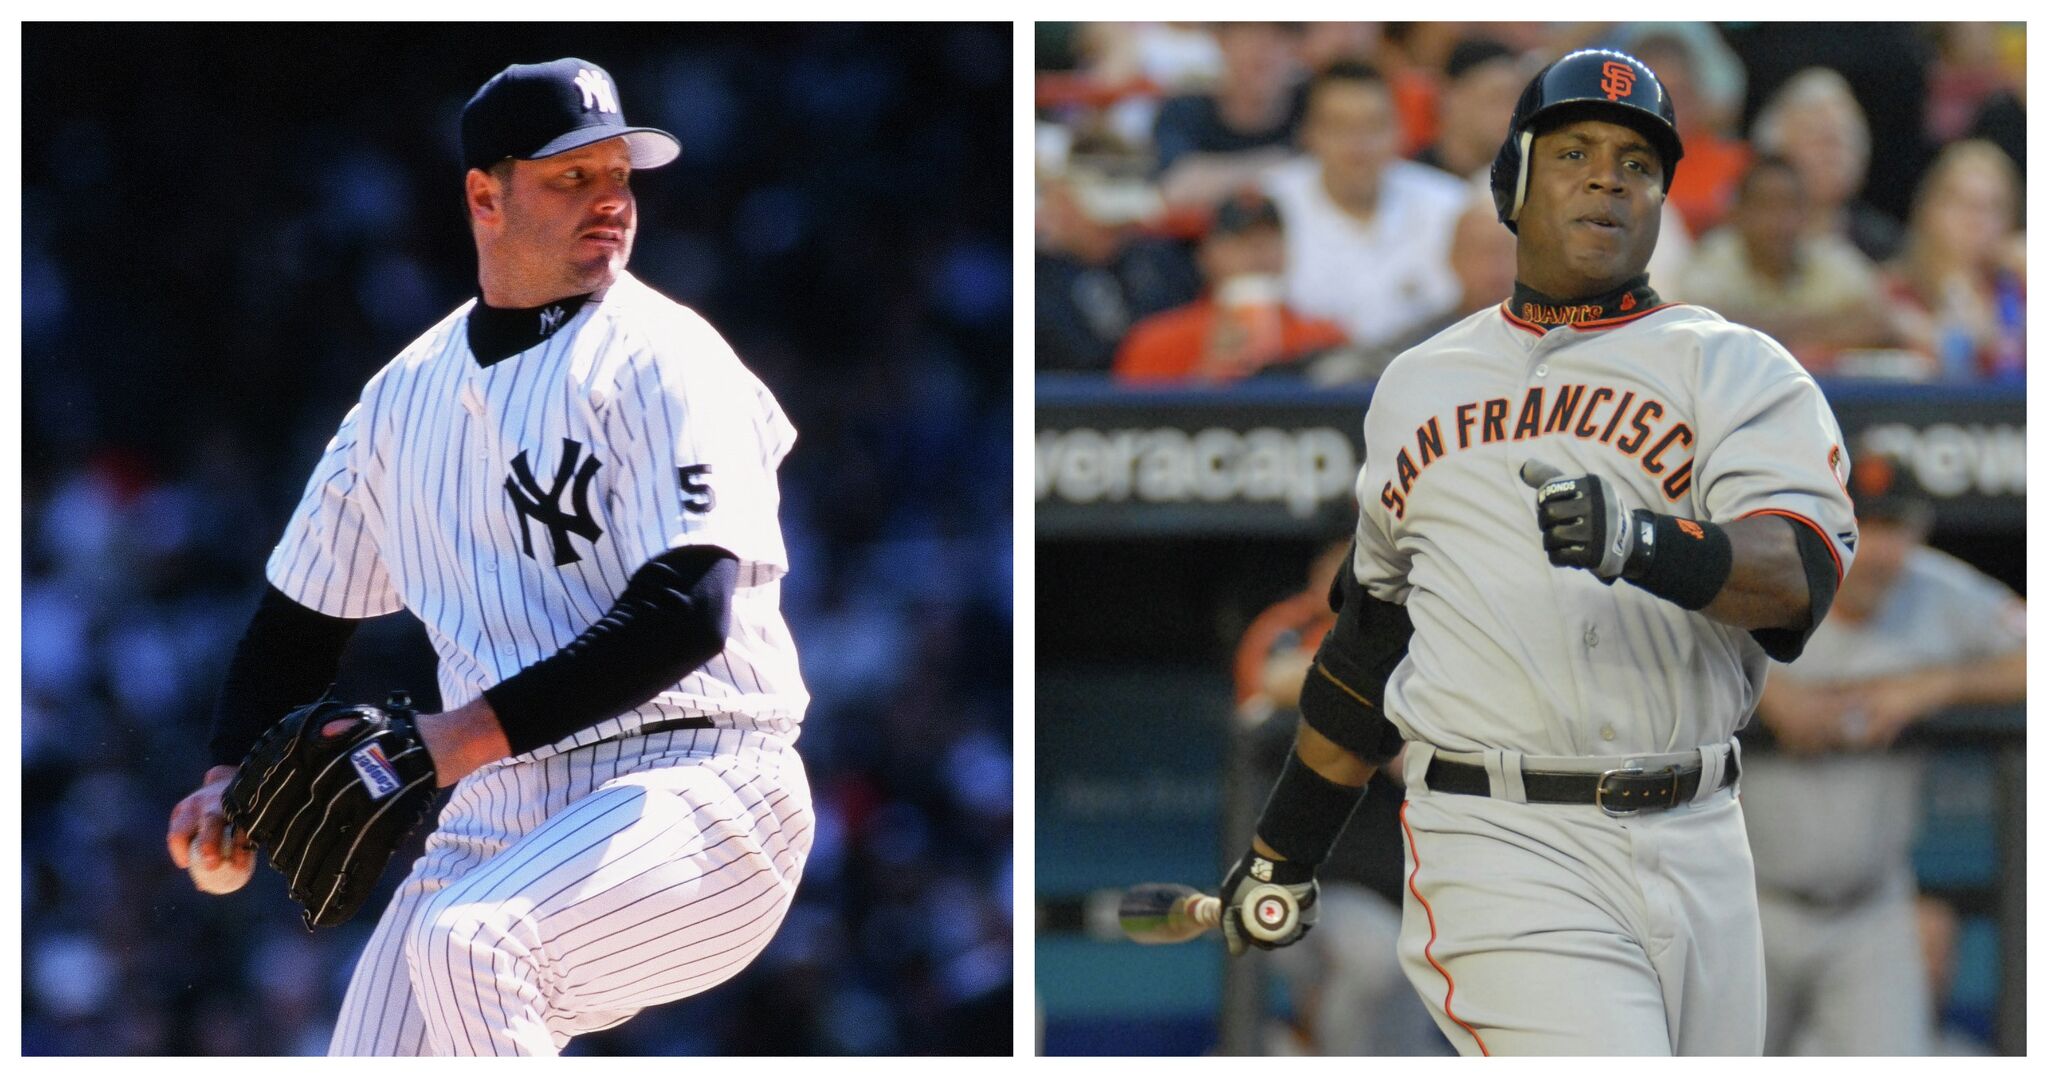 Former Yankee Roger Clemens has much in common with a certain NBA